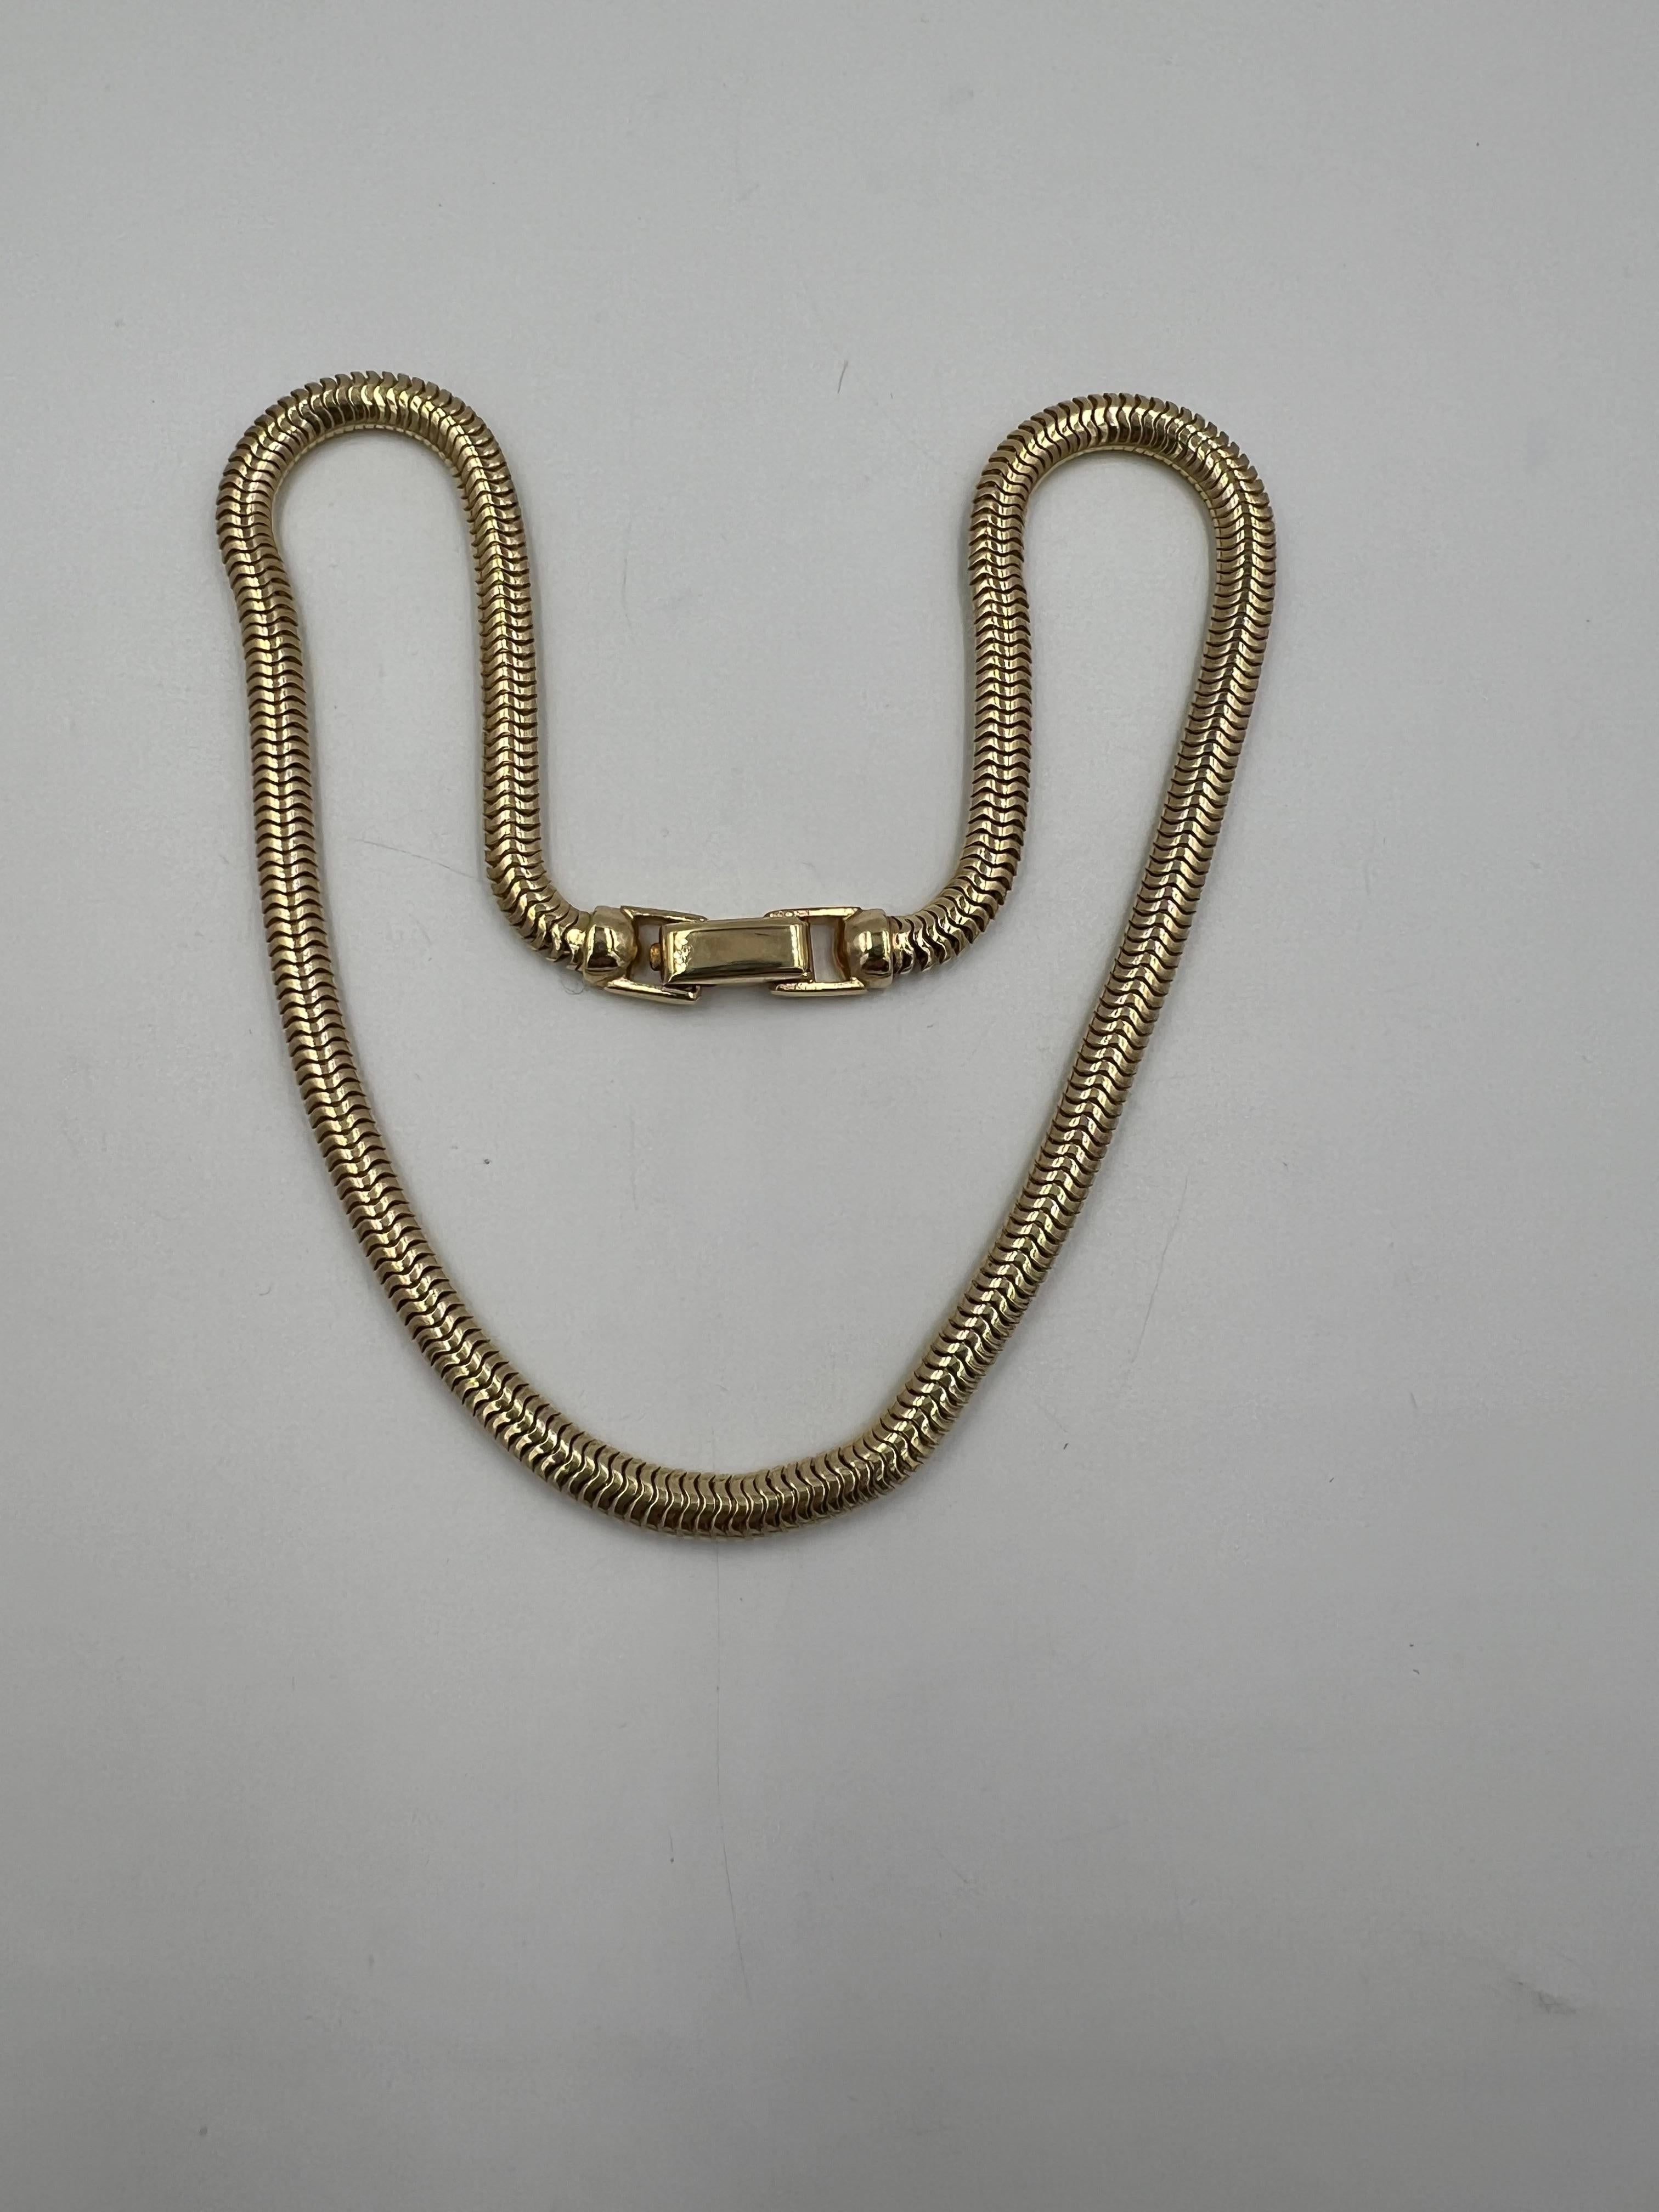 Modern Snake Chain Yellow Gold Necklace 16